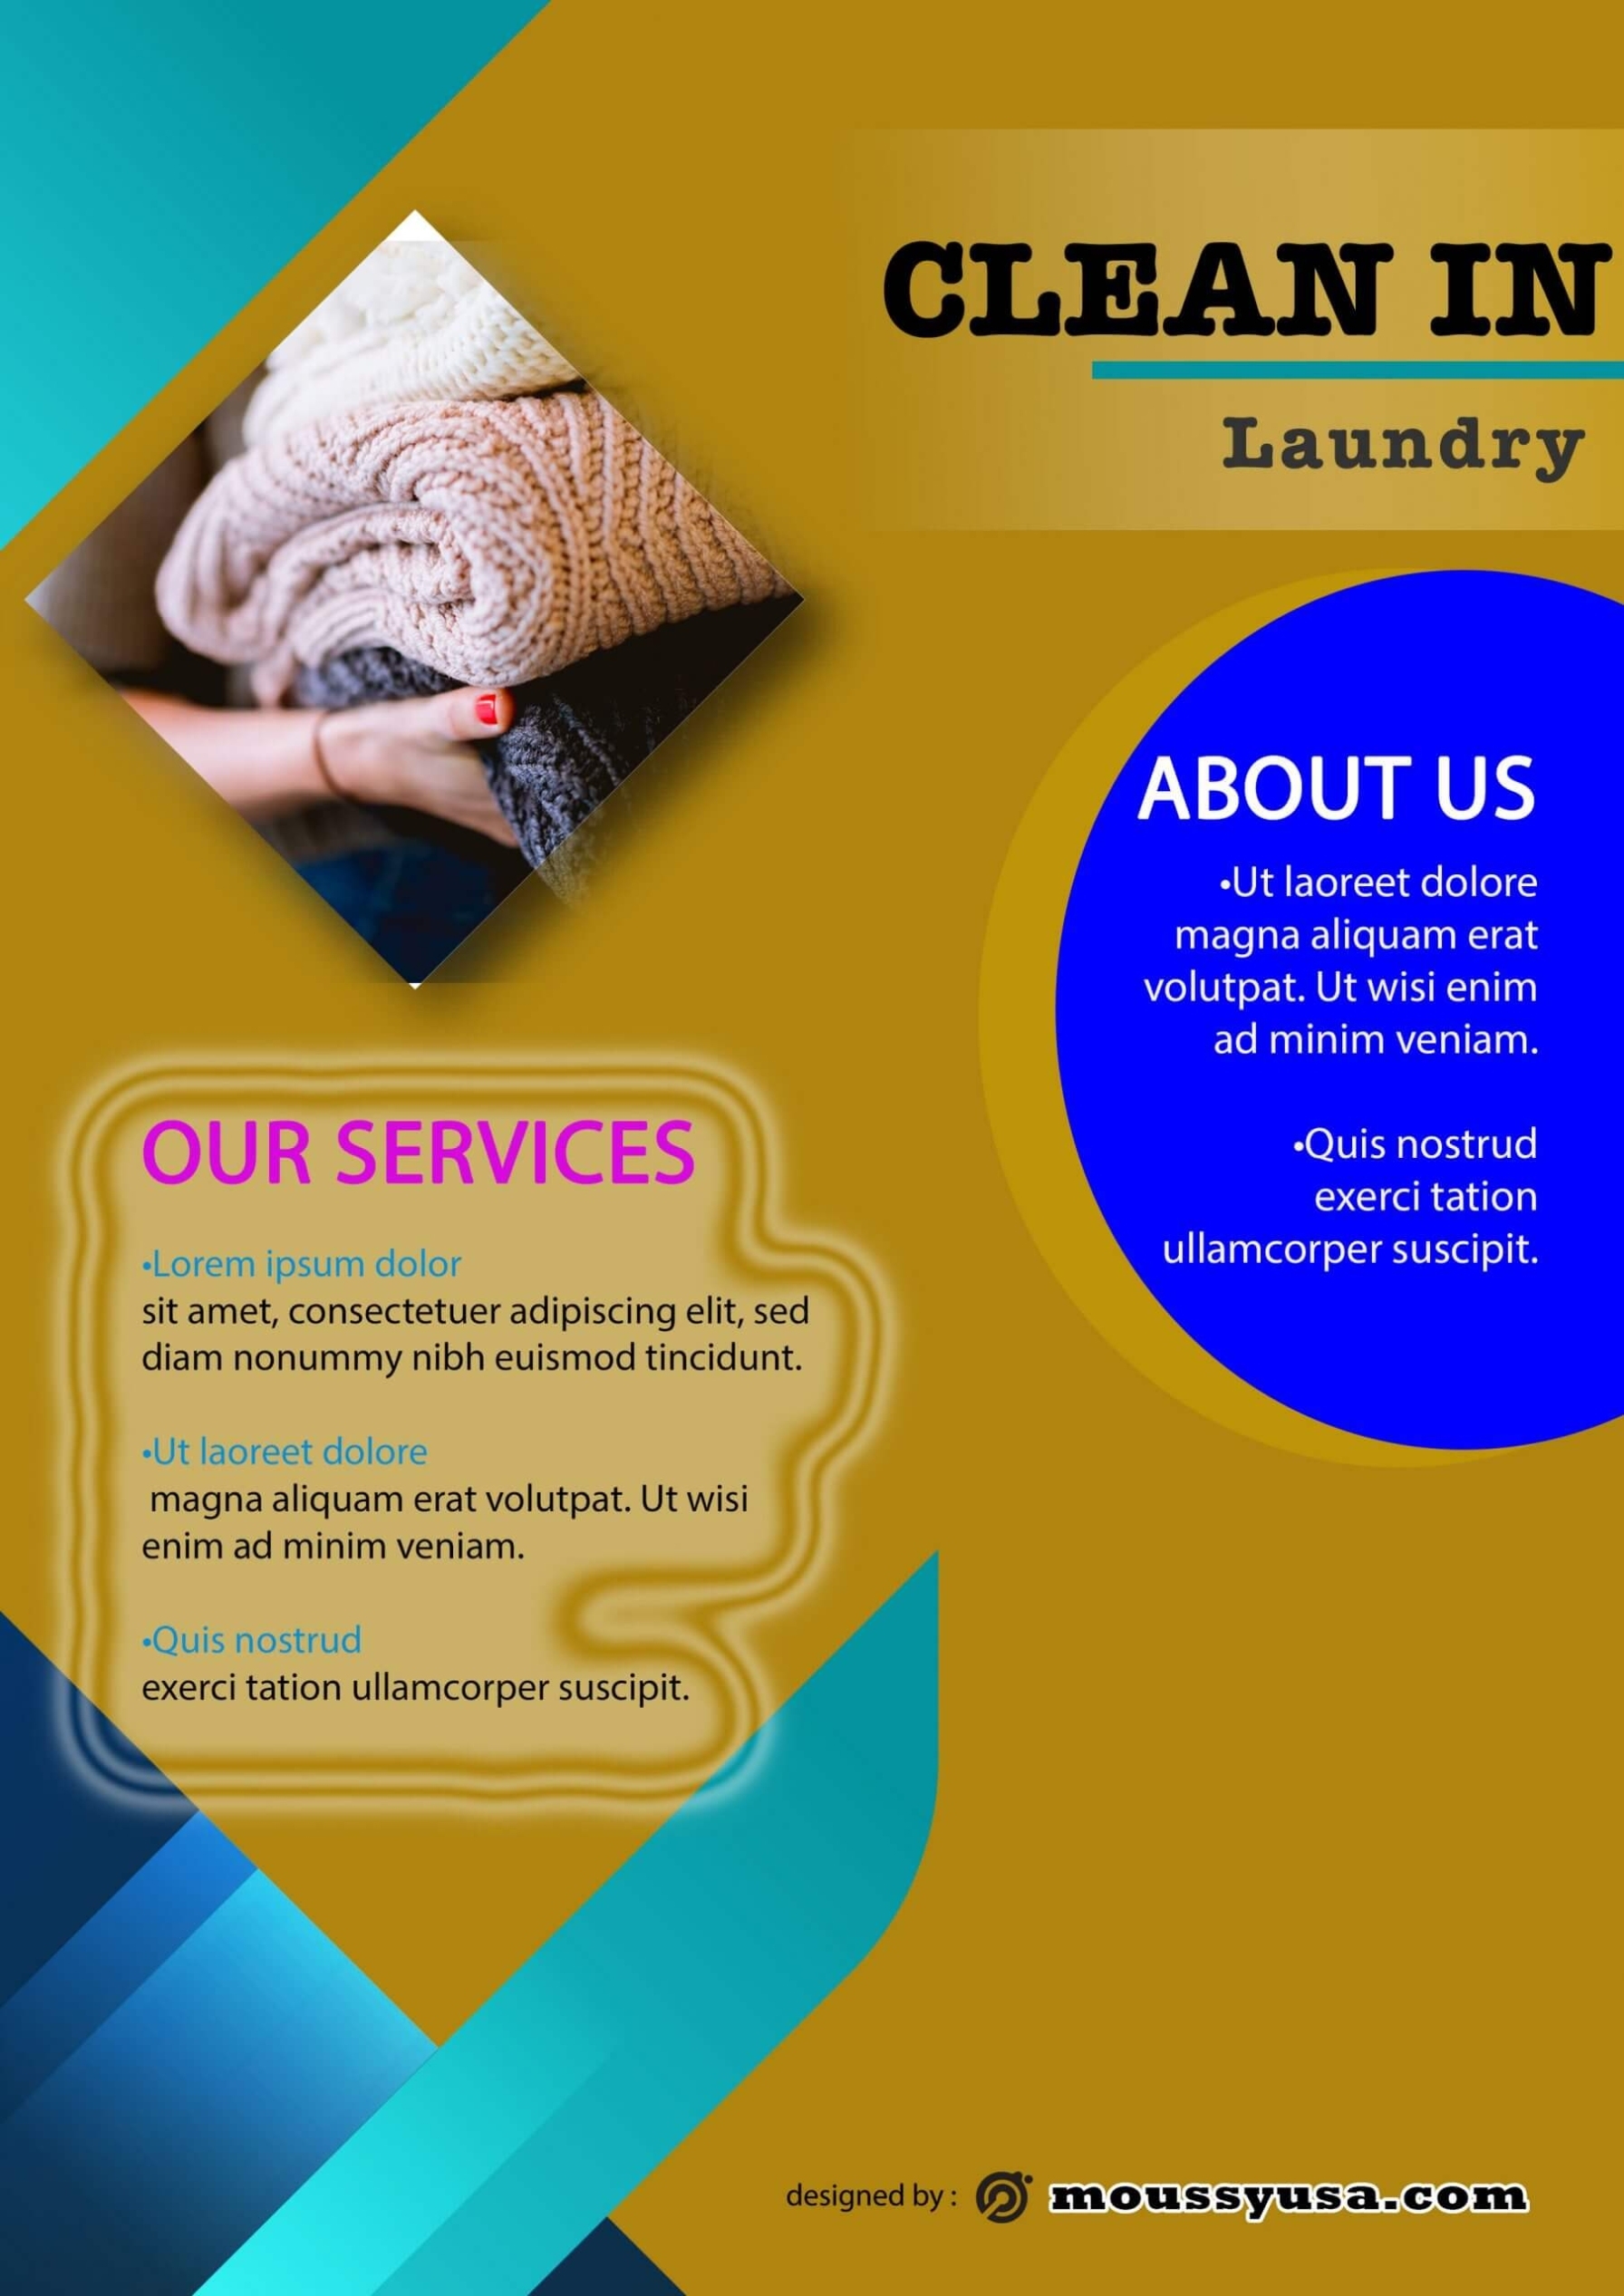 Laundry Service Flyer Psd Template Free | Mous Syusa In Cleaning Brochure Templates Free